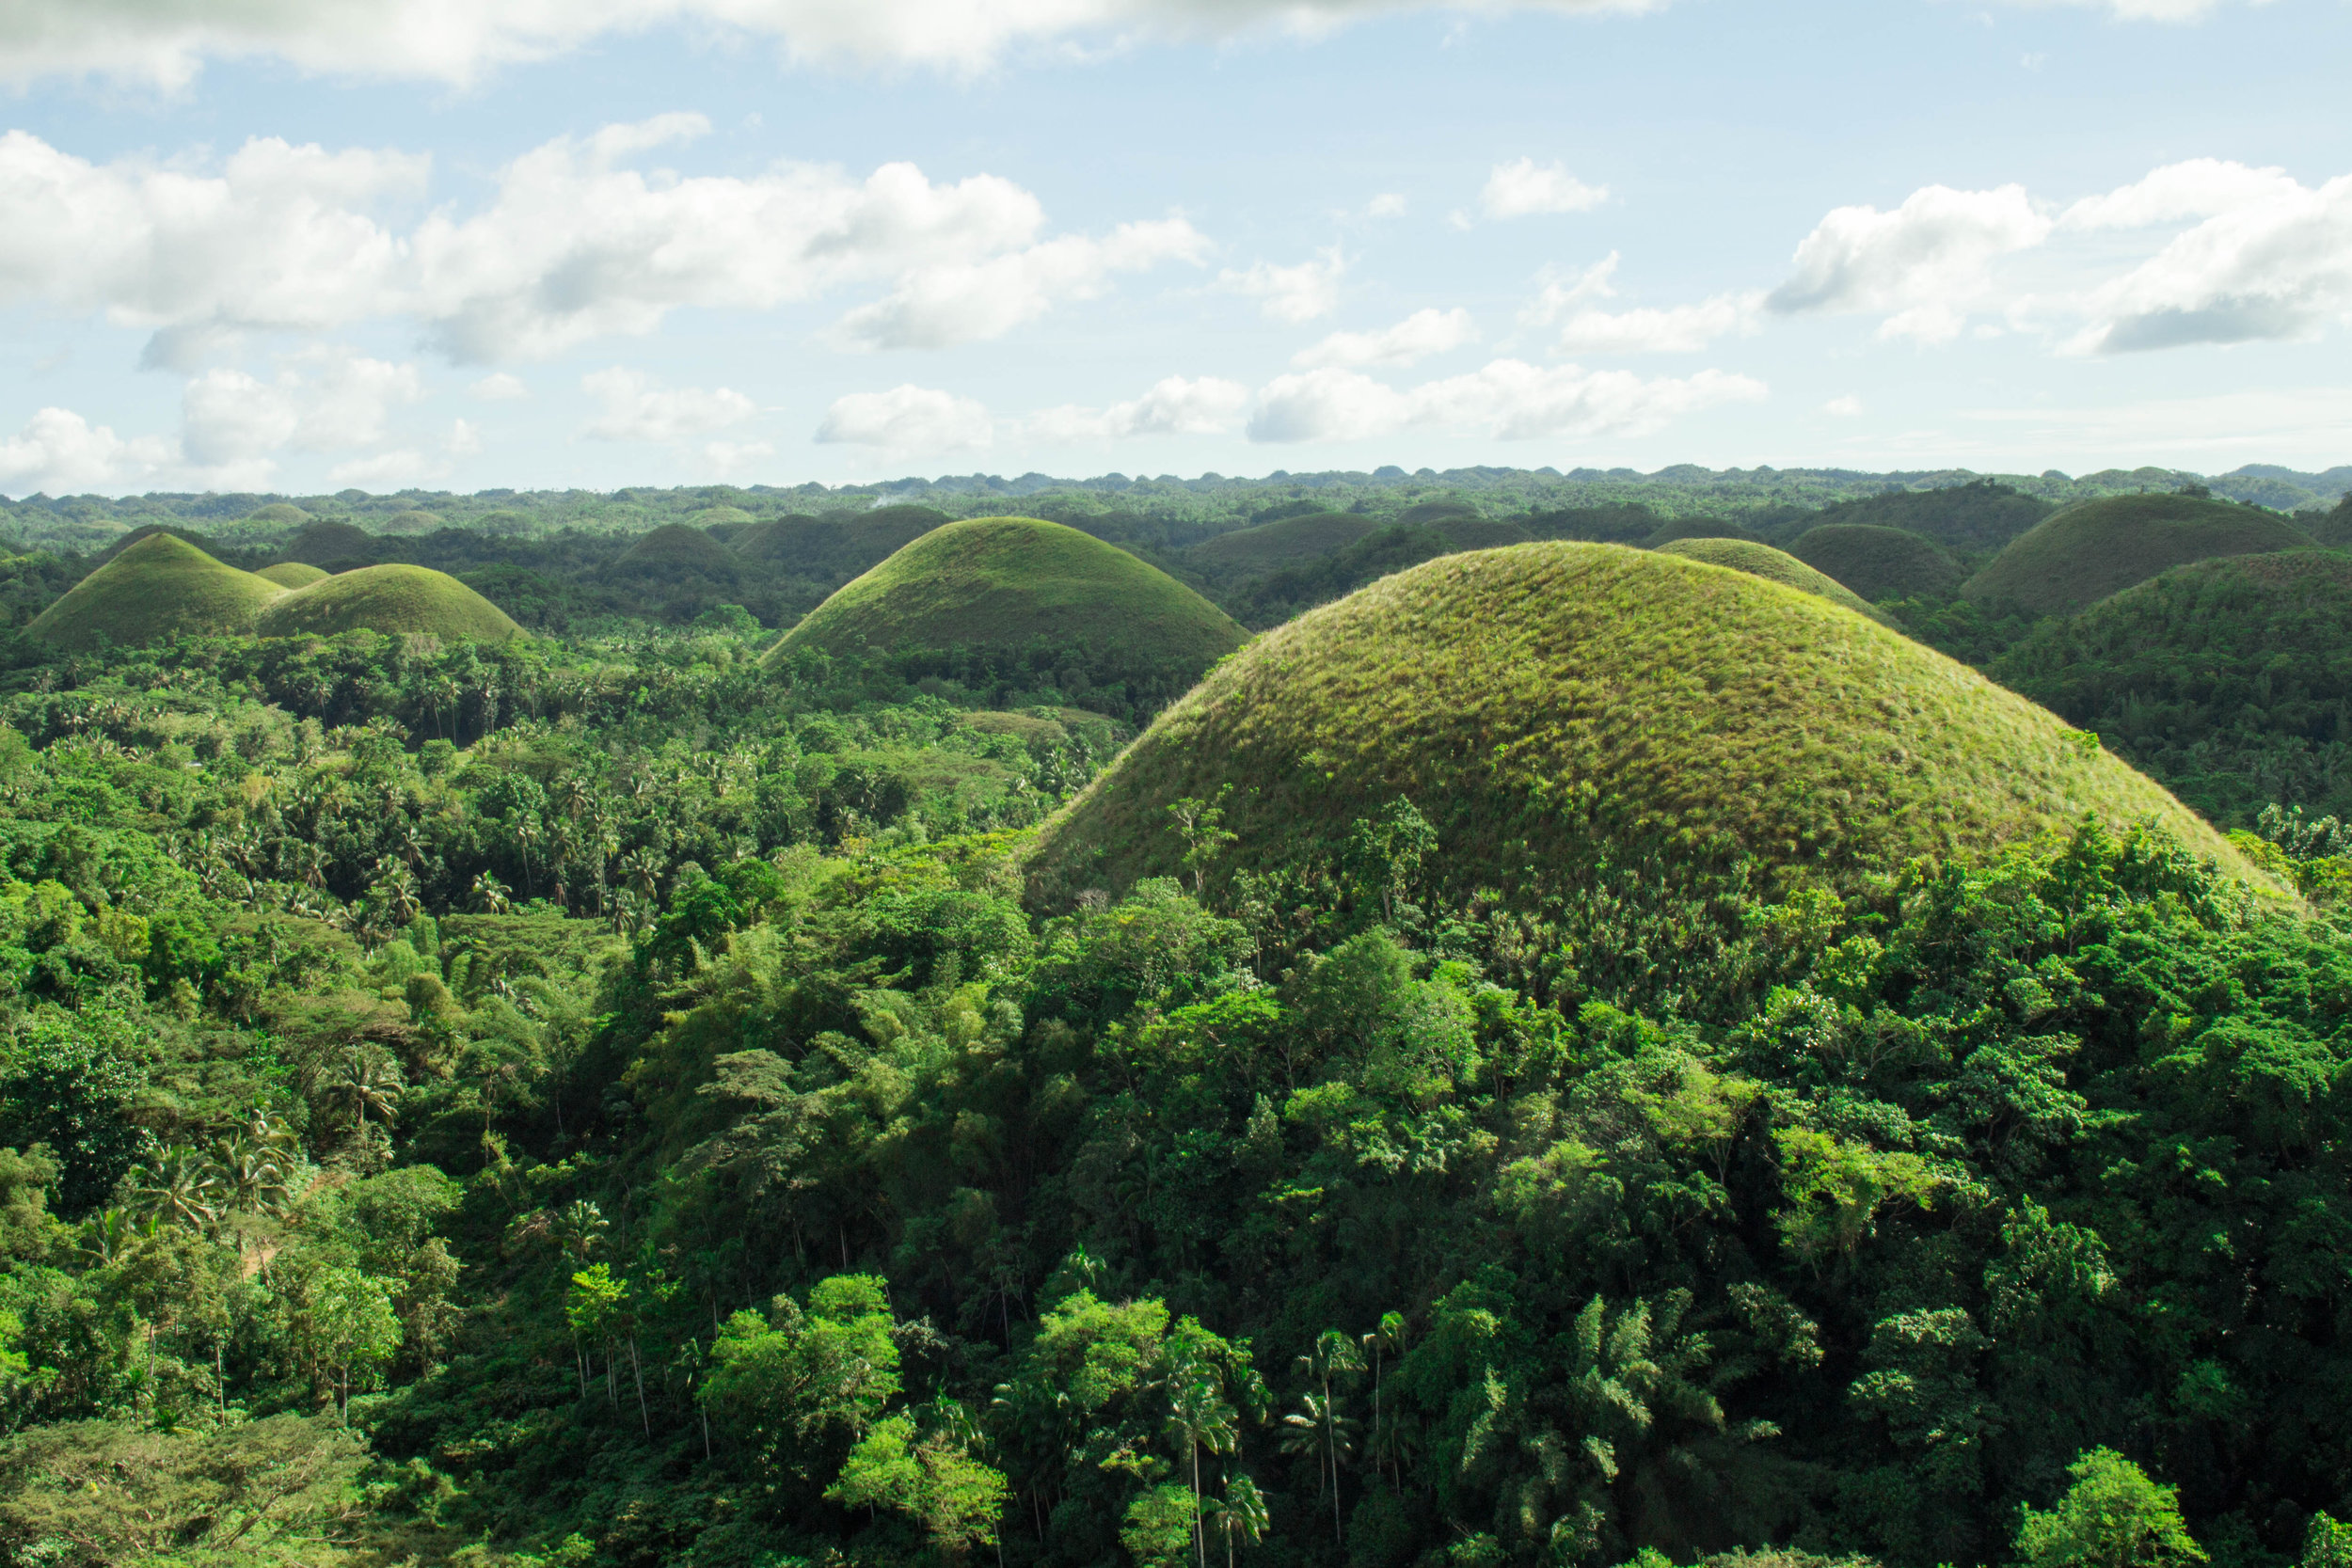 Chocolate Hills, named after the color that the grass takes on during the dry seaon